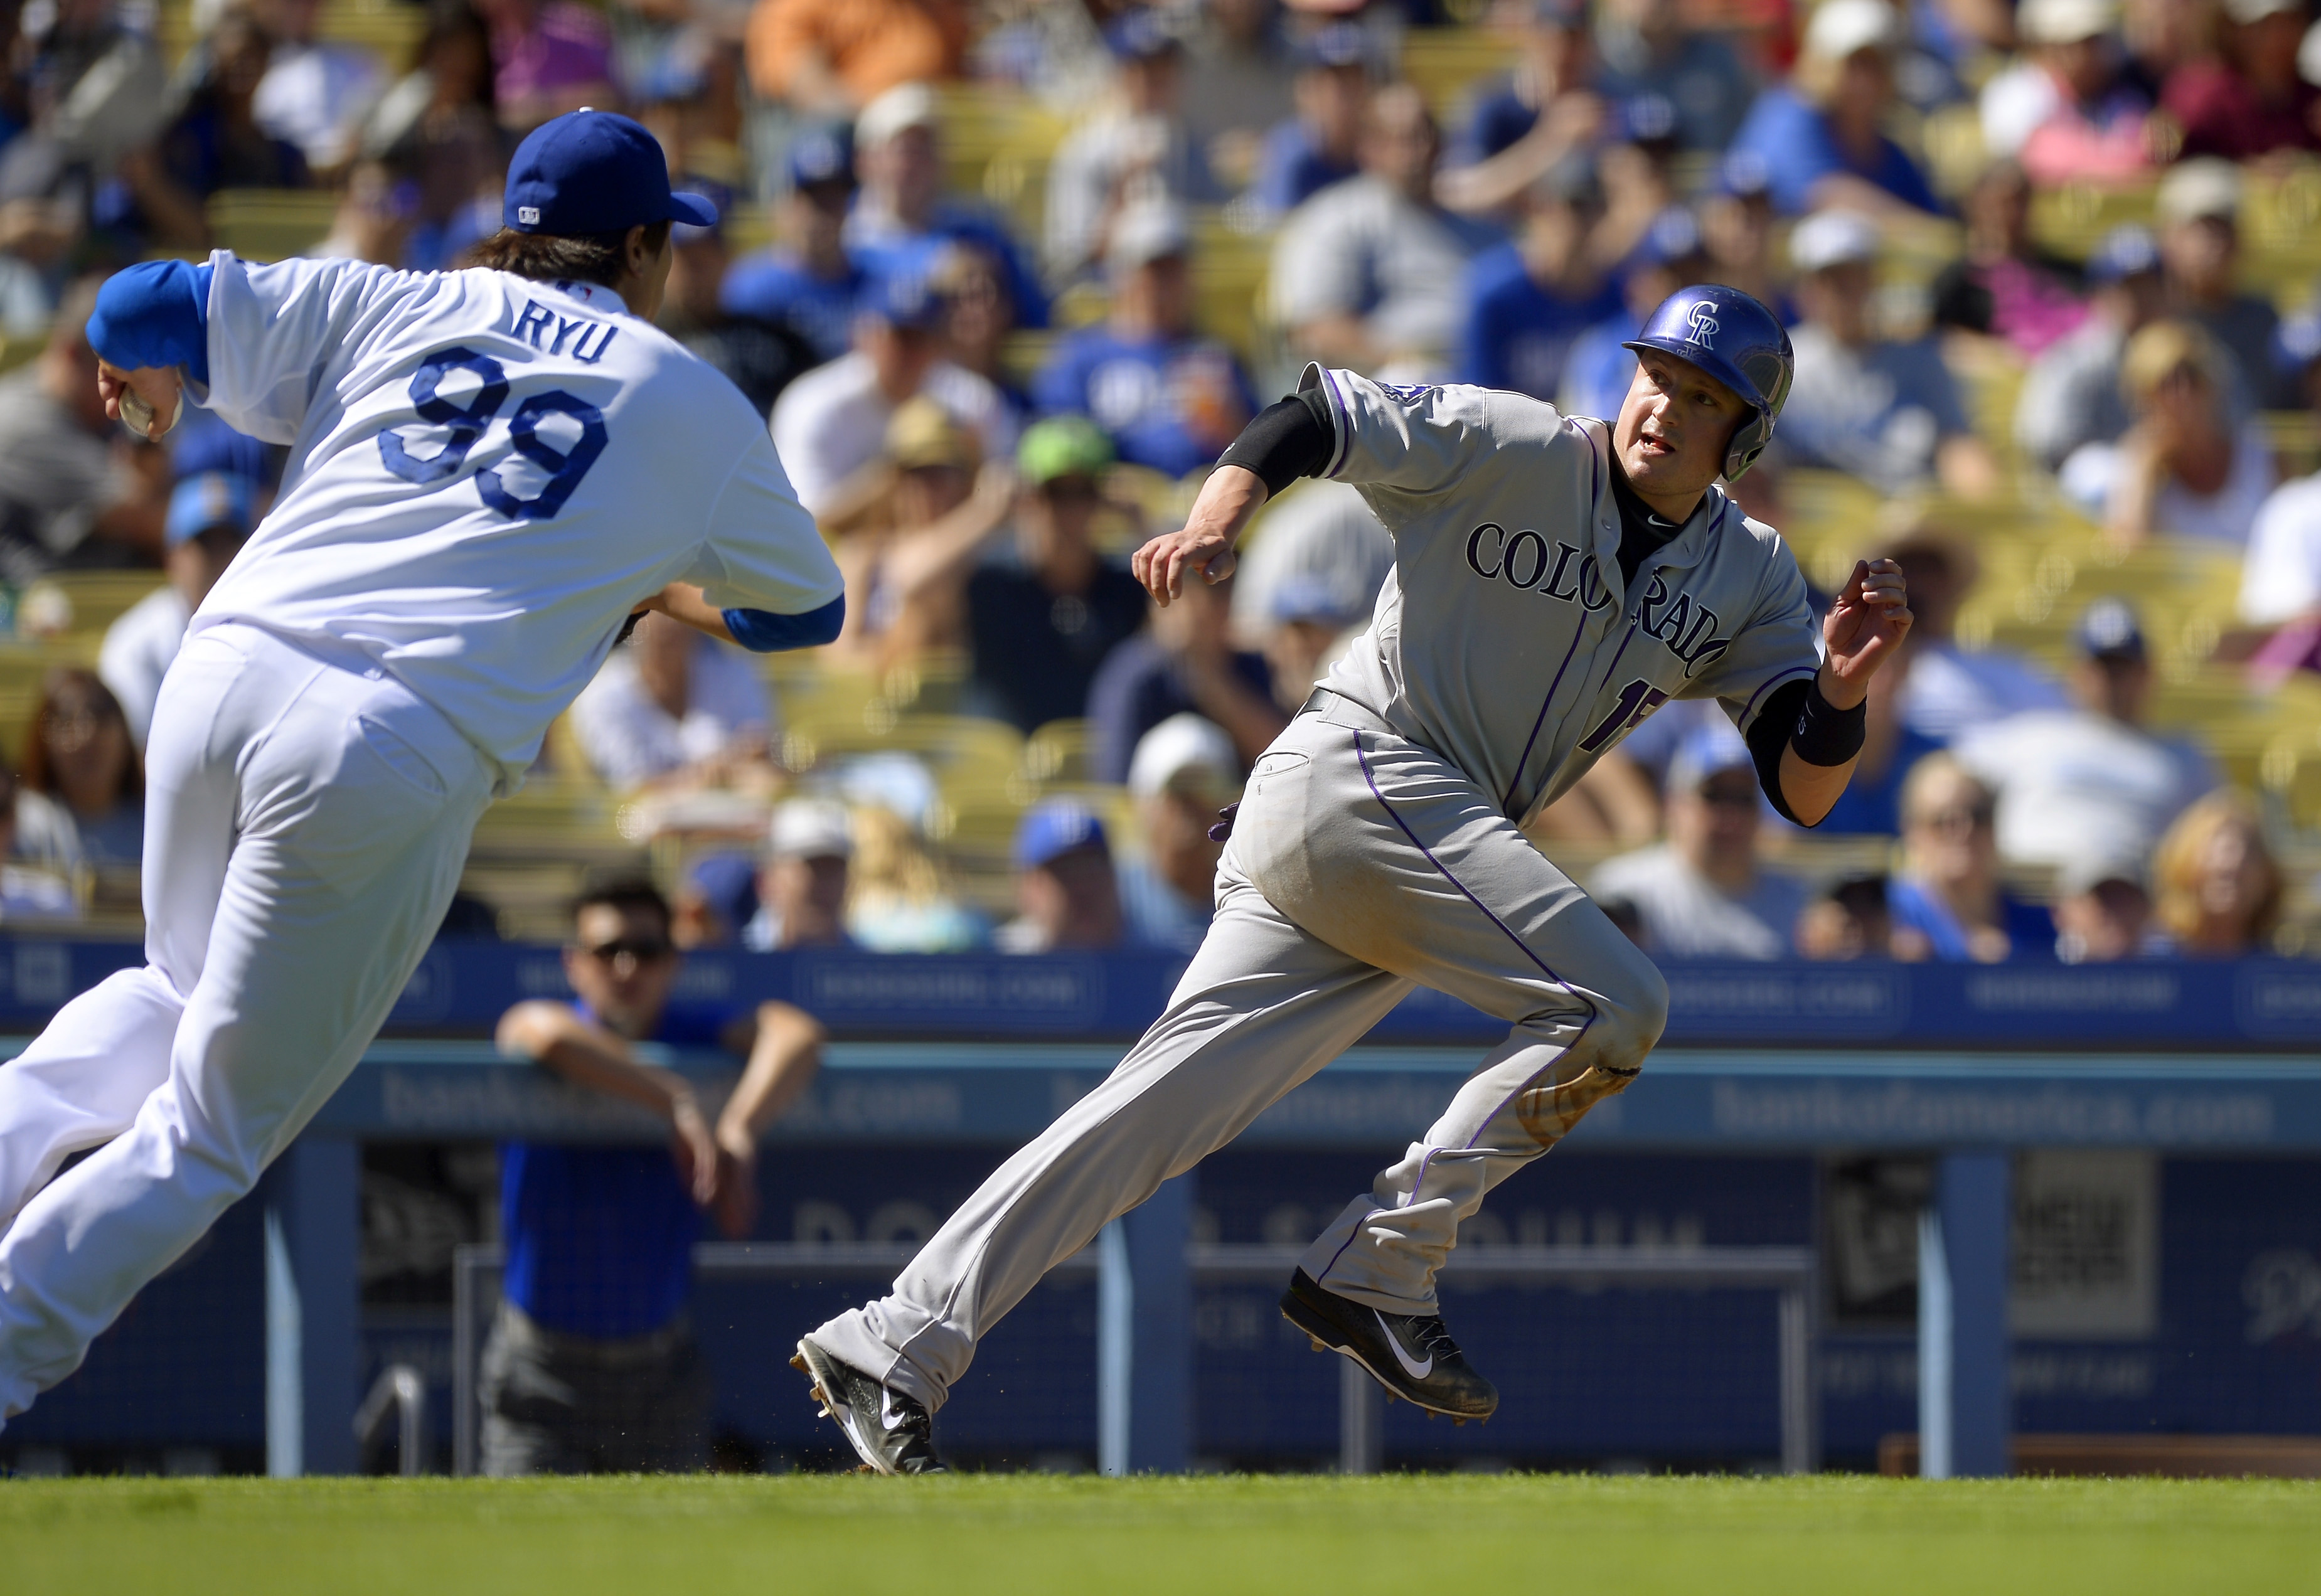 Los Angeles Dodgers starting pitcher Ryu Hyun-Jin, of South Korea, chases Colorado Rockies' Jordan Pacheco between third and home during a rundown in the fourth inning of a baseball game, Sunday, Sept. 29, 2013, in Los Angeles. Pacheco was tagged out on the play. (AP Photo/Mark J. Terrill)